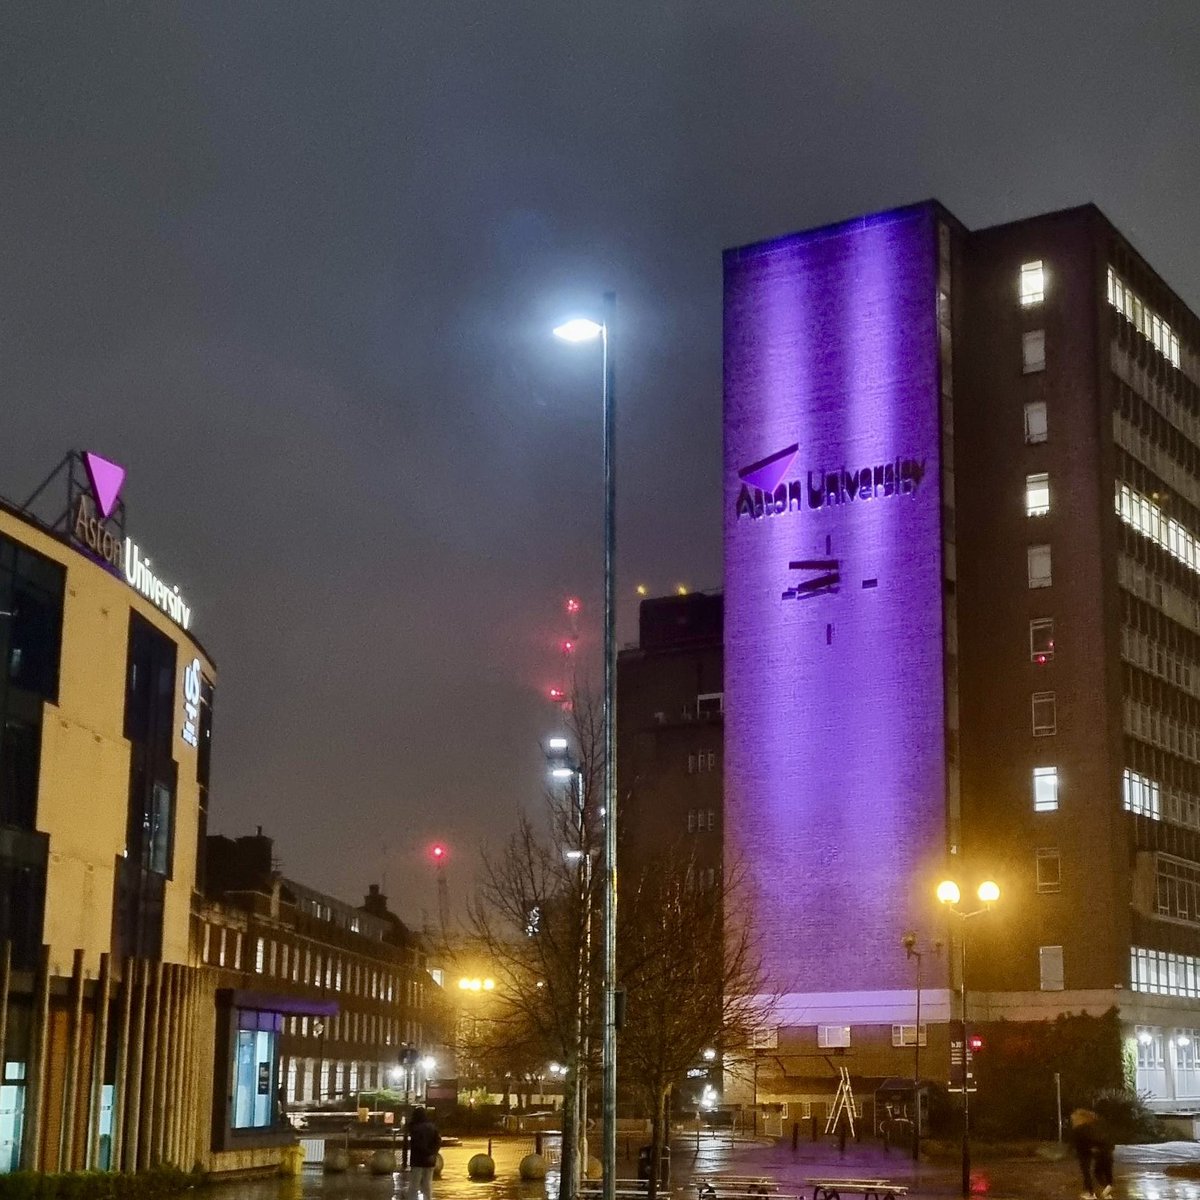 Wonderful to see our Main Building and @AstonUniversity Clock Tower lit up in Aston purple. A new beacon of light on our city campus and this part of the #Birmingham city centre. Thank you Aston Estates team for bringing this building to “life” again. @AstonAlumni @aston_union